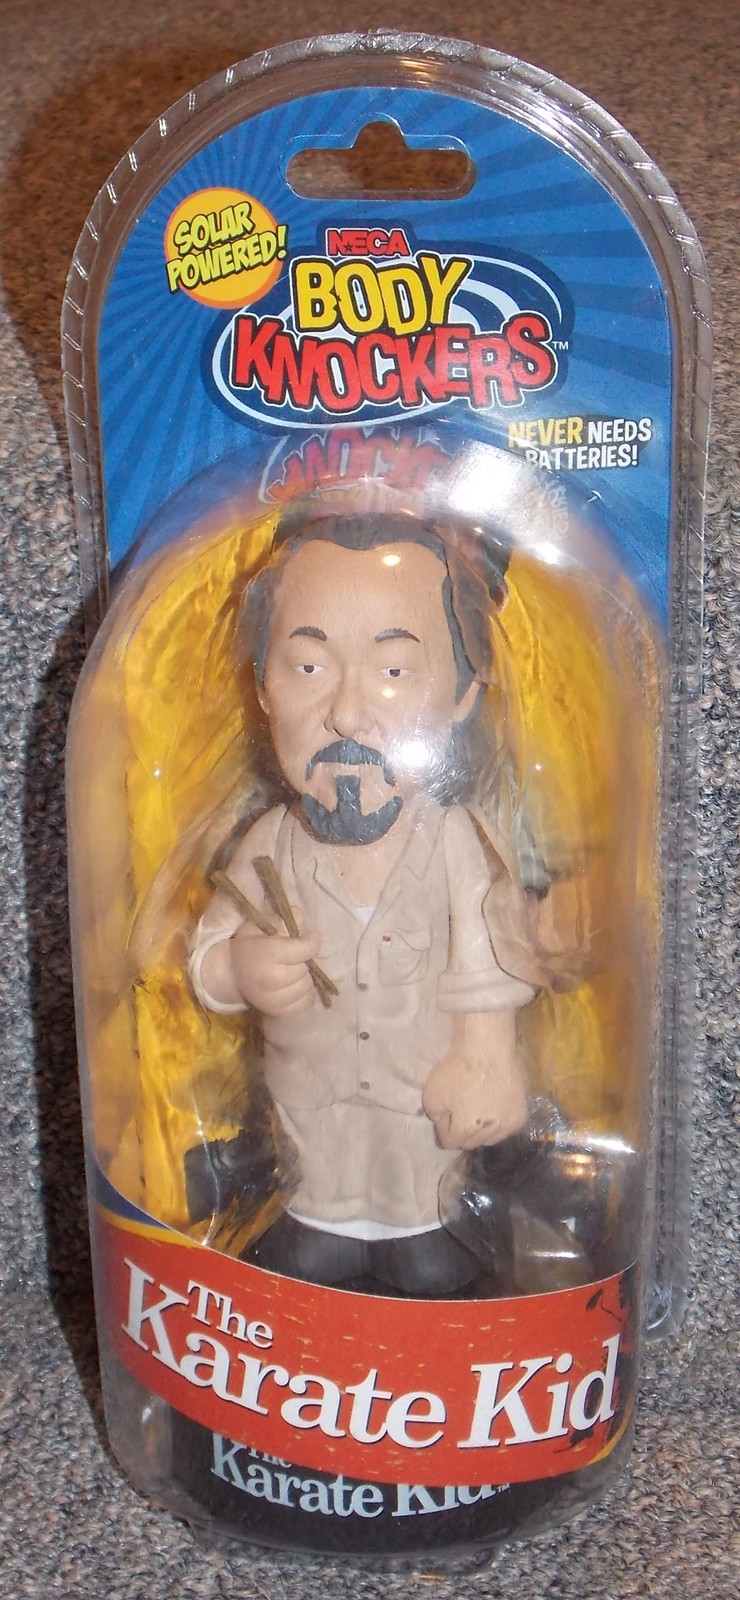 Primary image for 2019 NECA Body Knockers Karate Kid MR Miyagi Figure New In The Package